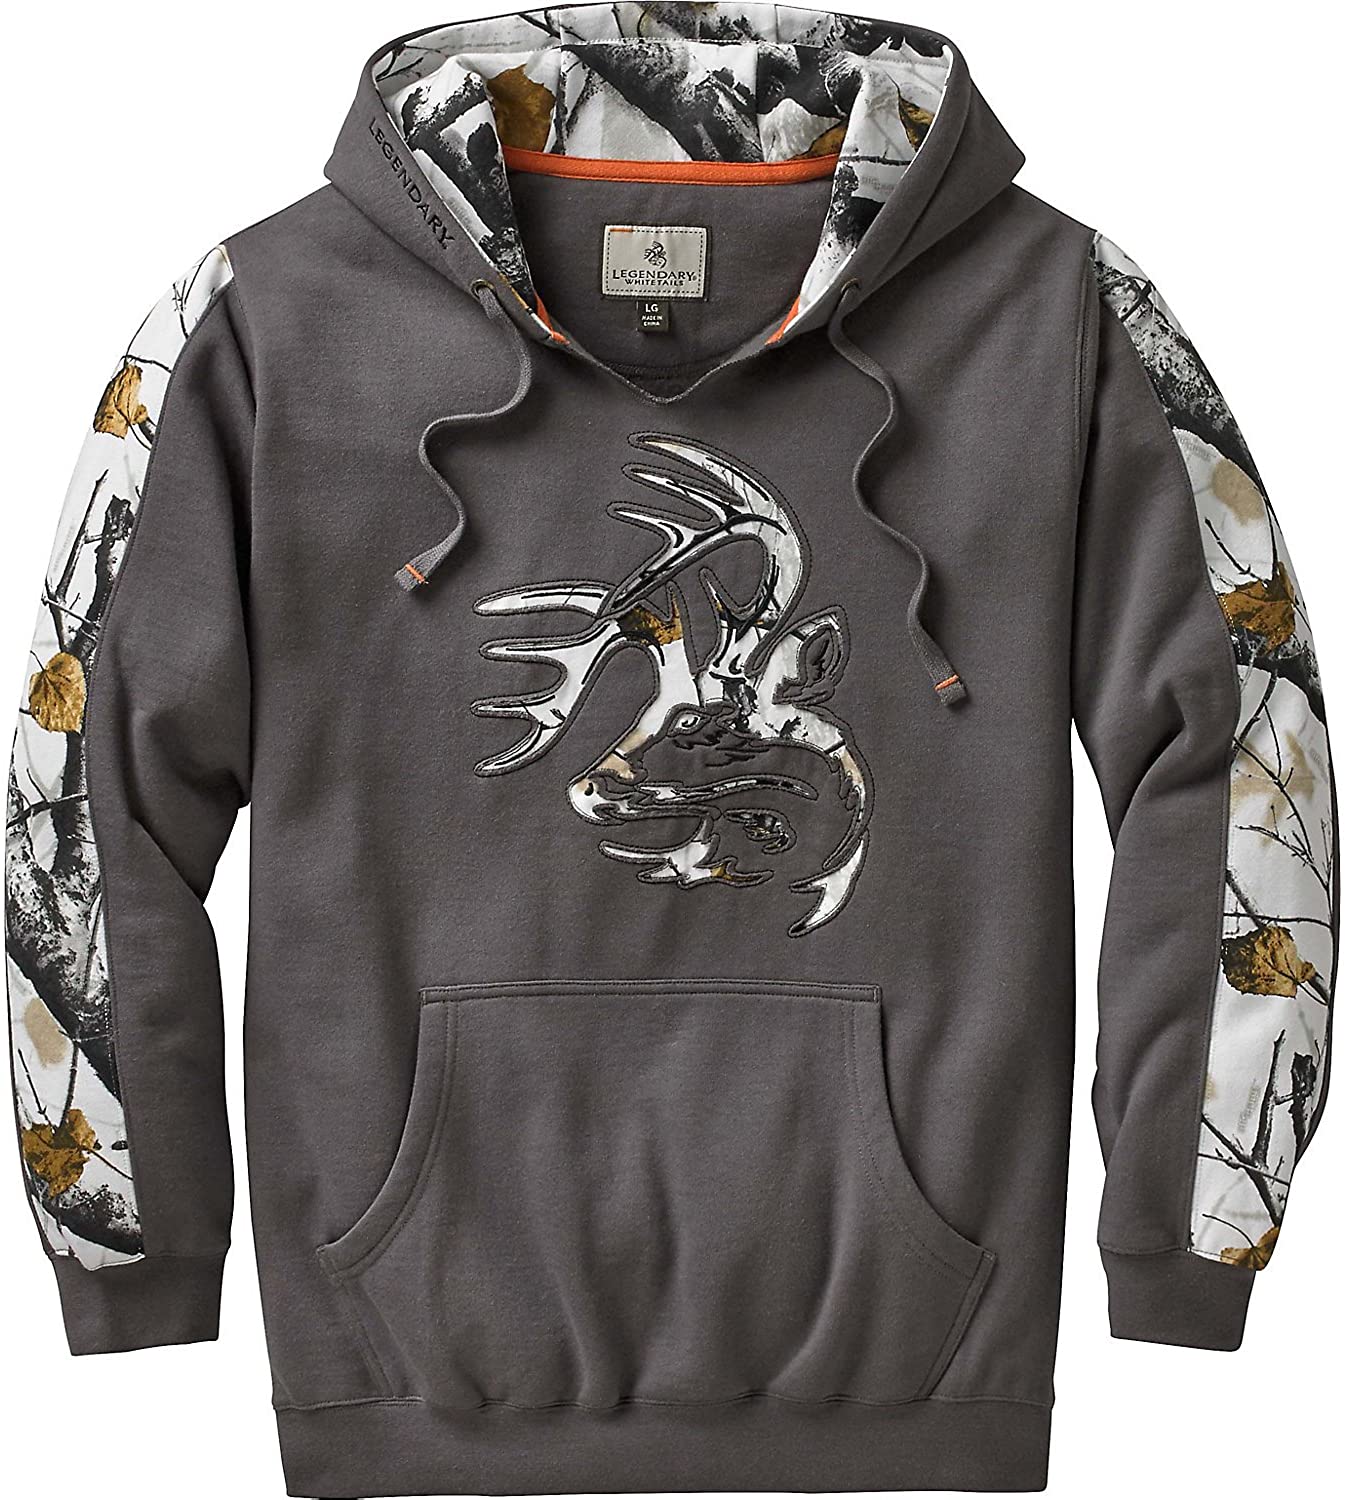 Legendary Whitetails Mens Camo Plaid Outfitter Hoodie